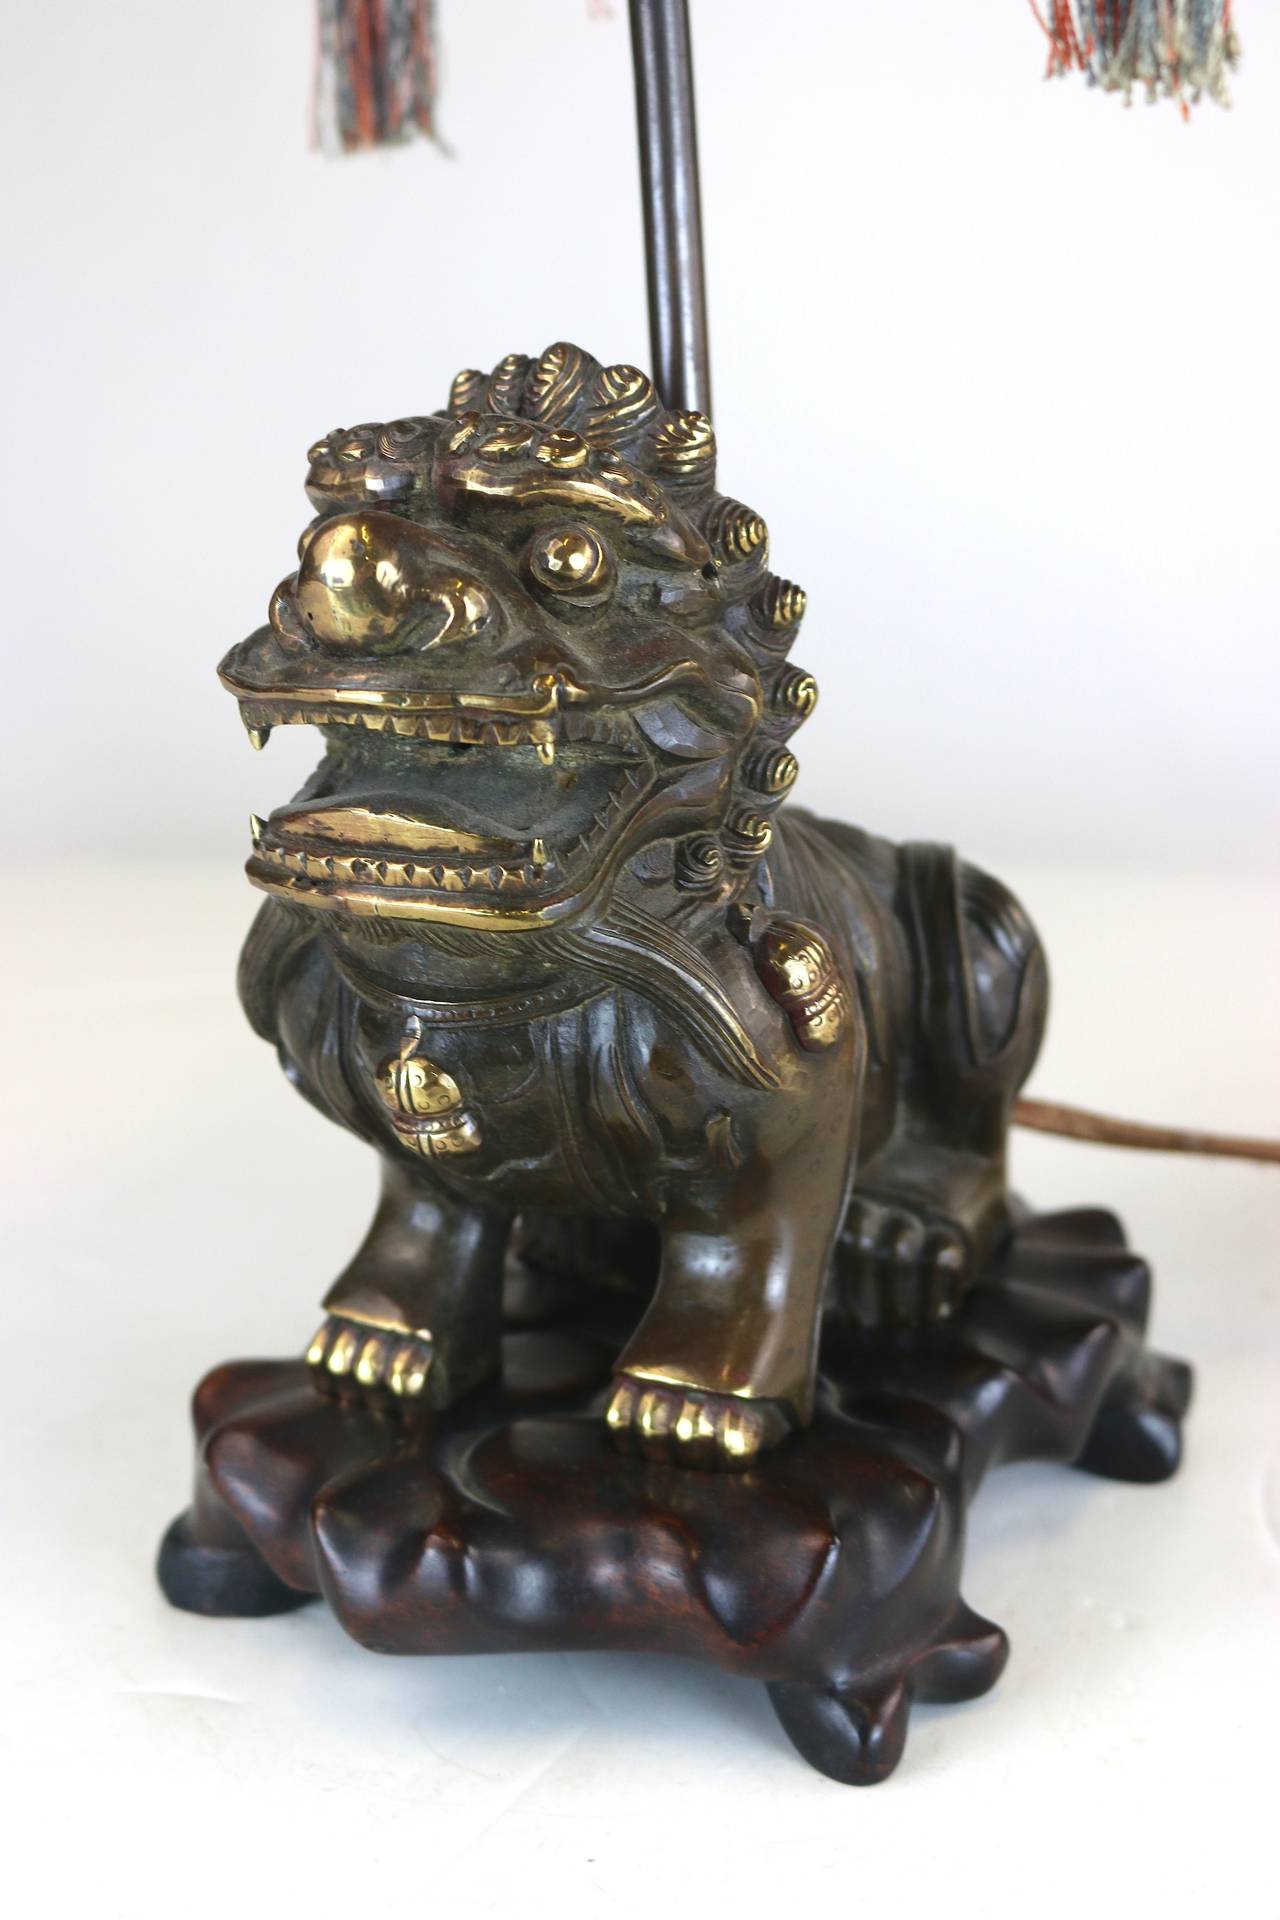 Extraordinary exotic 1920s one of a kind chinoiserie table lamp hand woven delicate beautifully designed exquisitely colorful pagoda shape tasselled shade with nicely aged patina brass/bronze foo dog on wood carved conforming base. With original